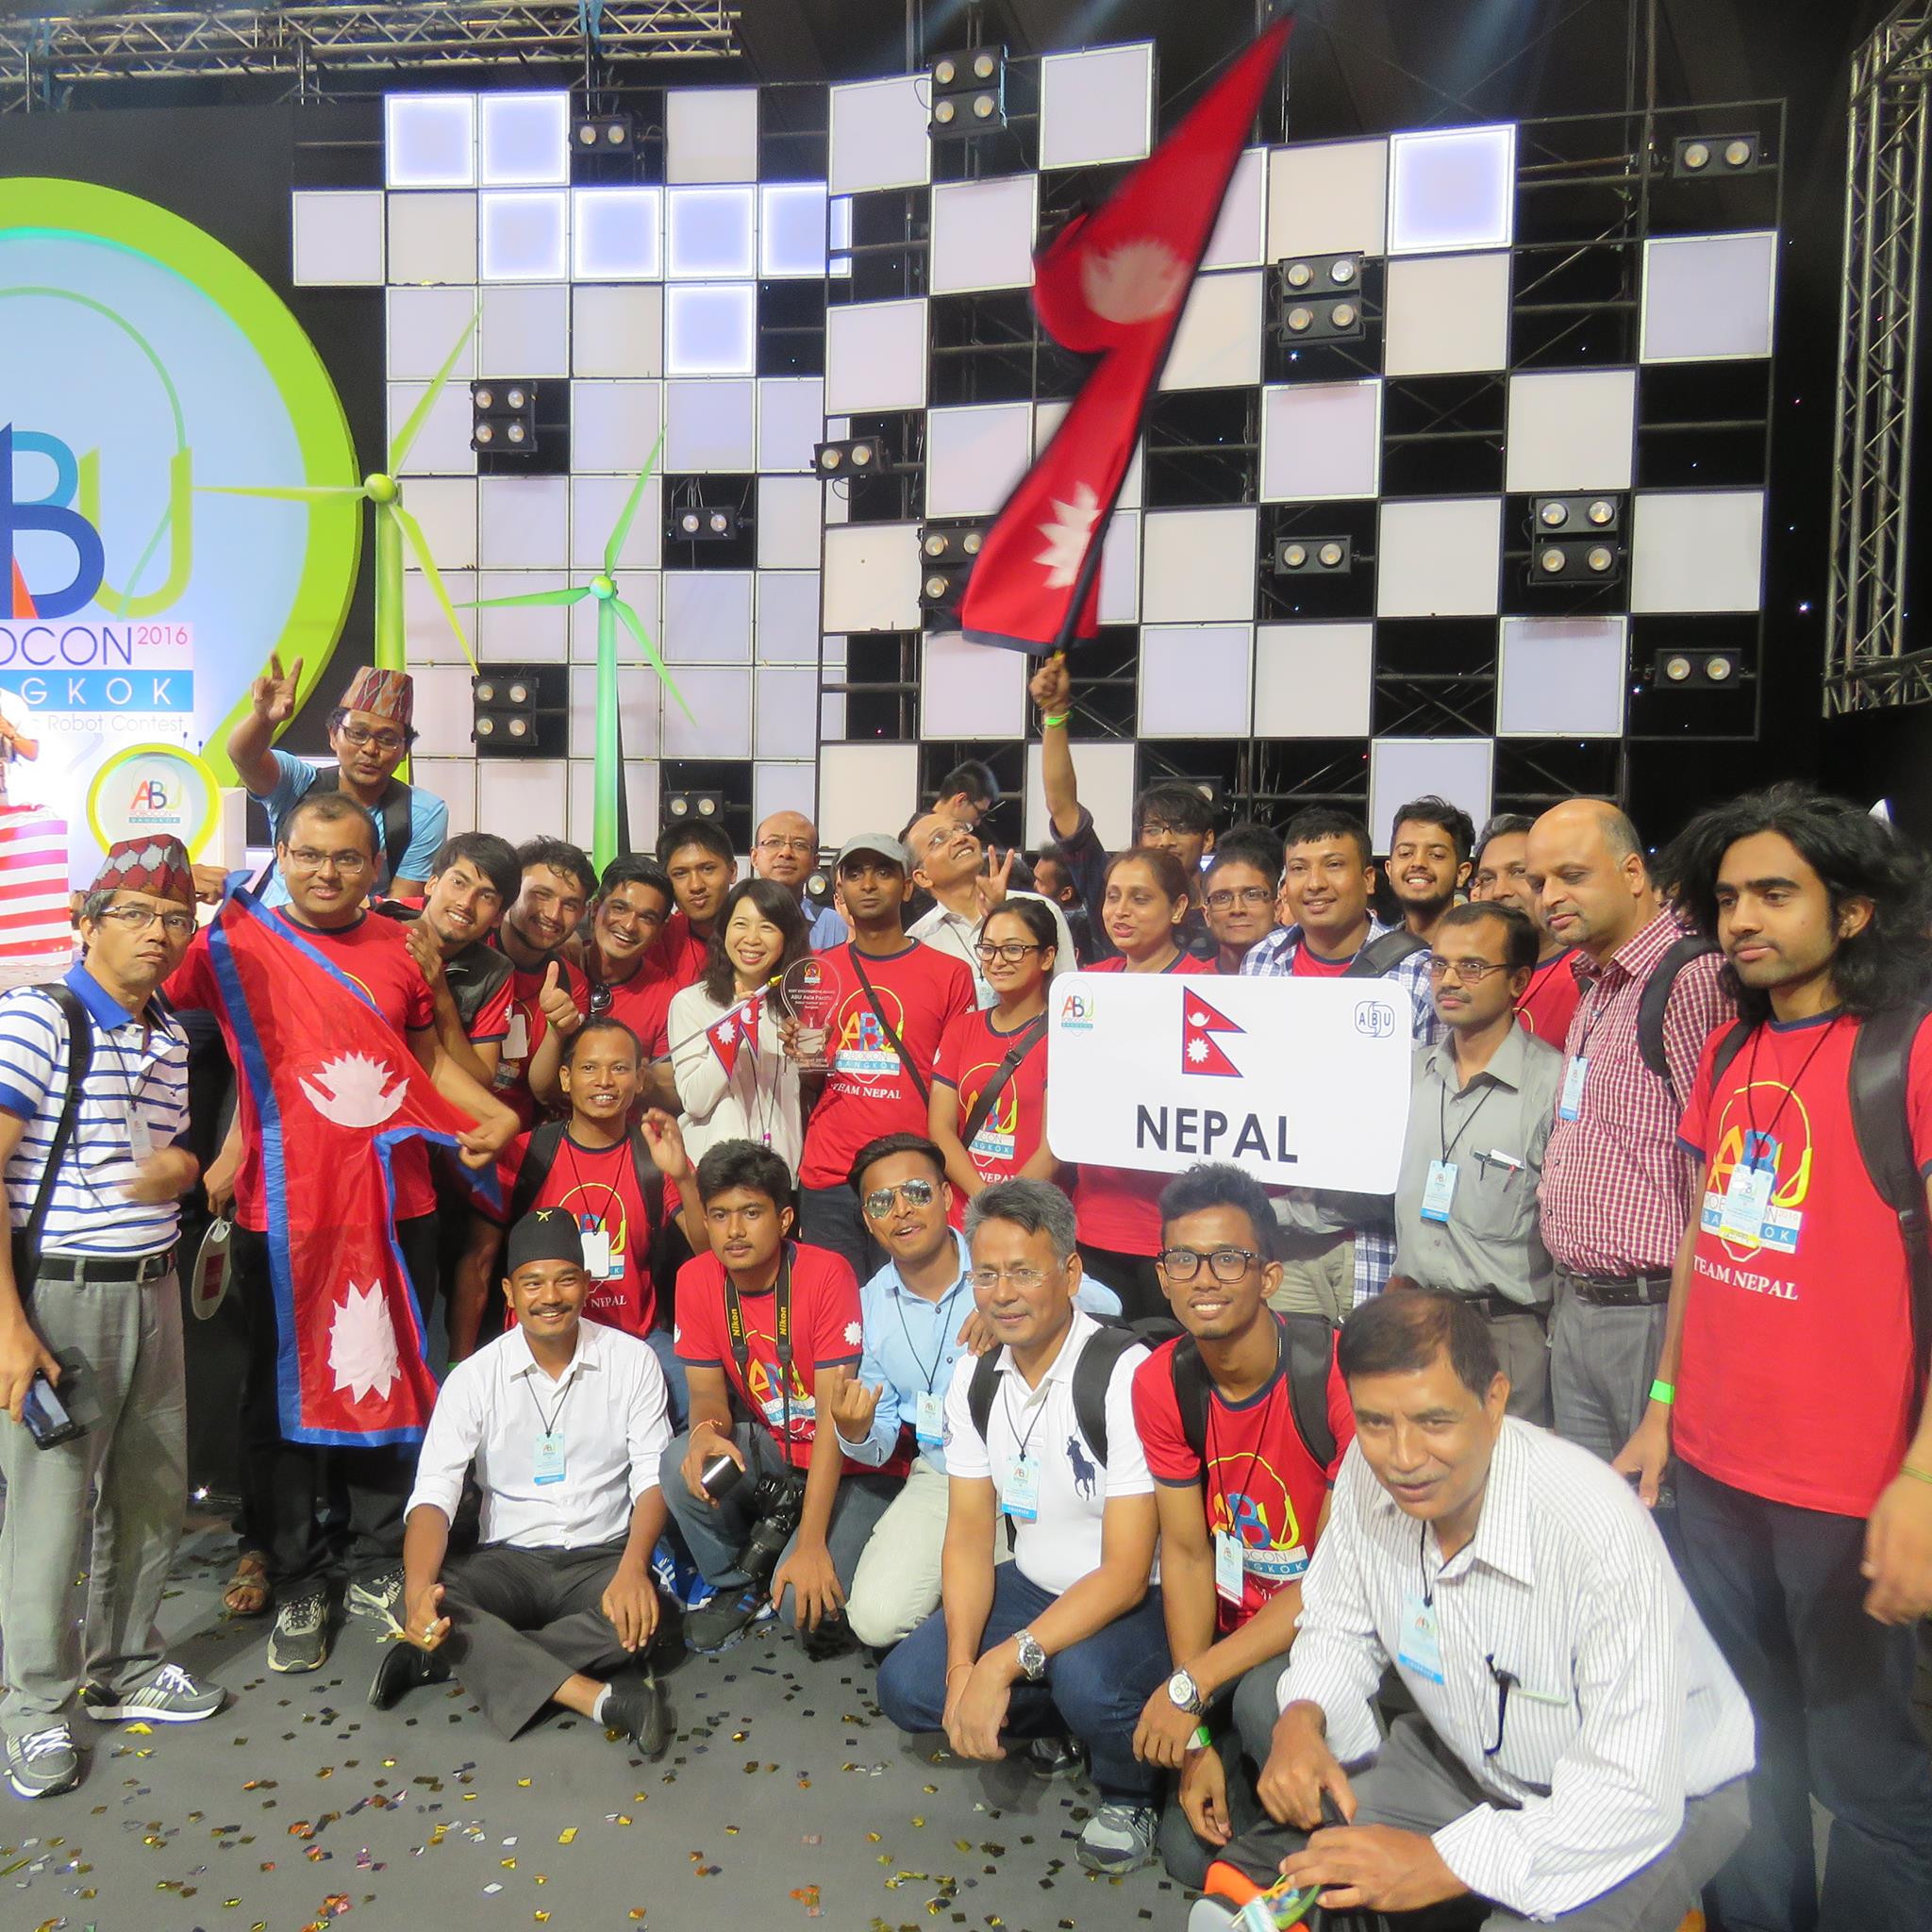 Team Nepal bags two awards in ABU Robocon 2016